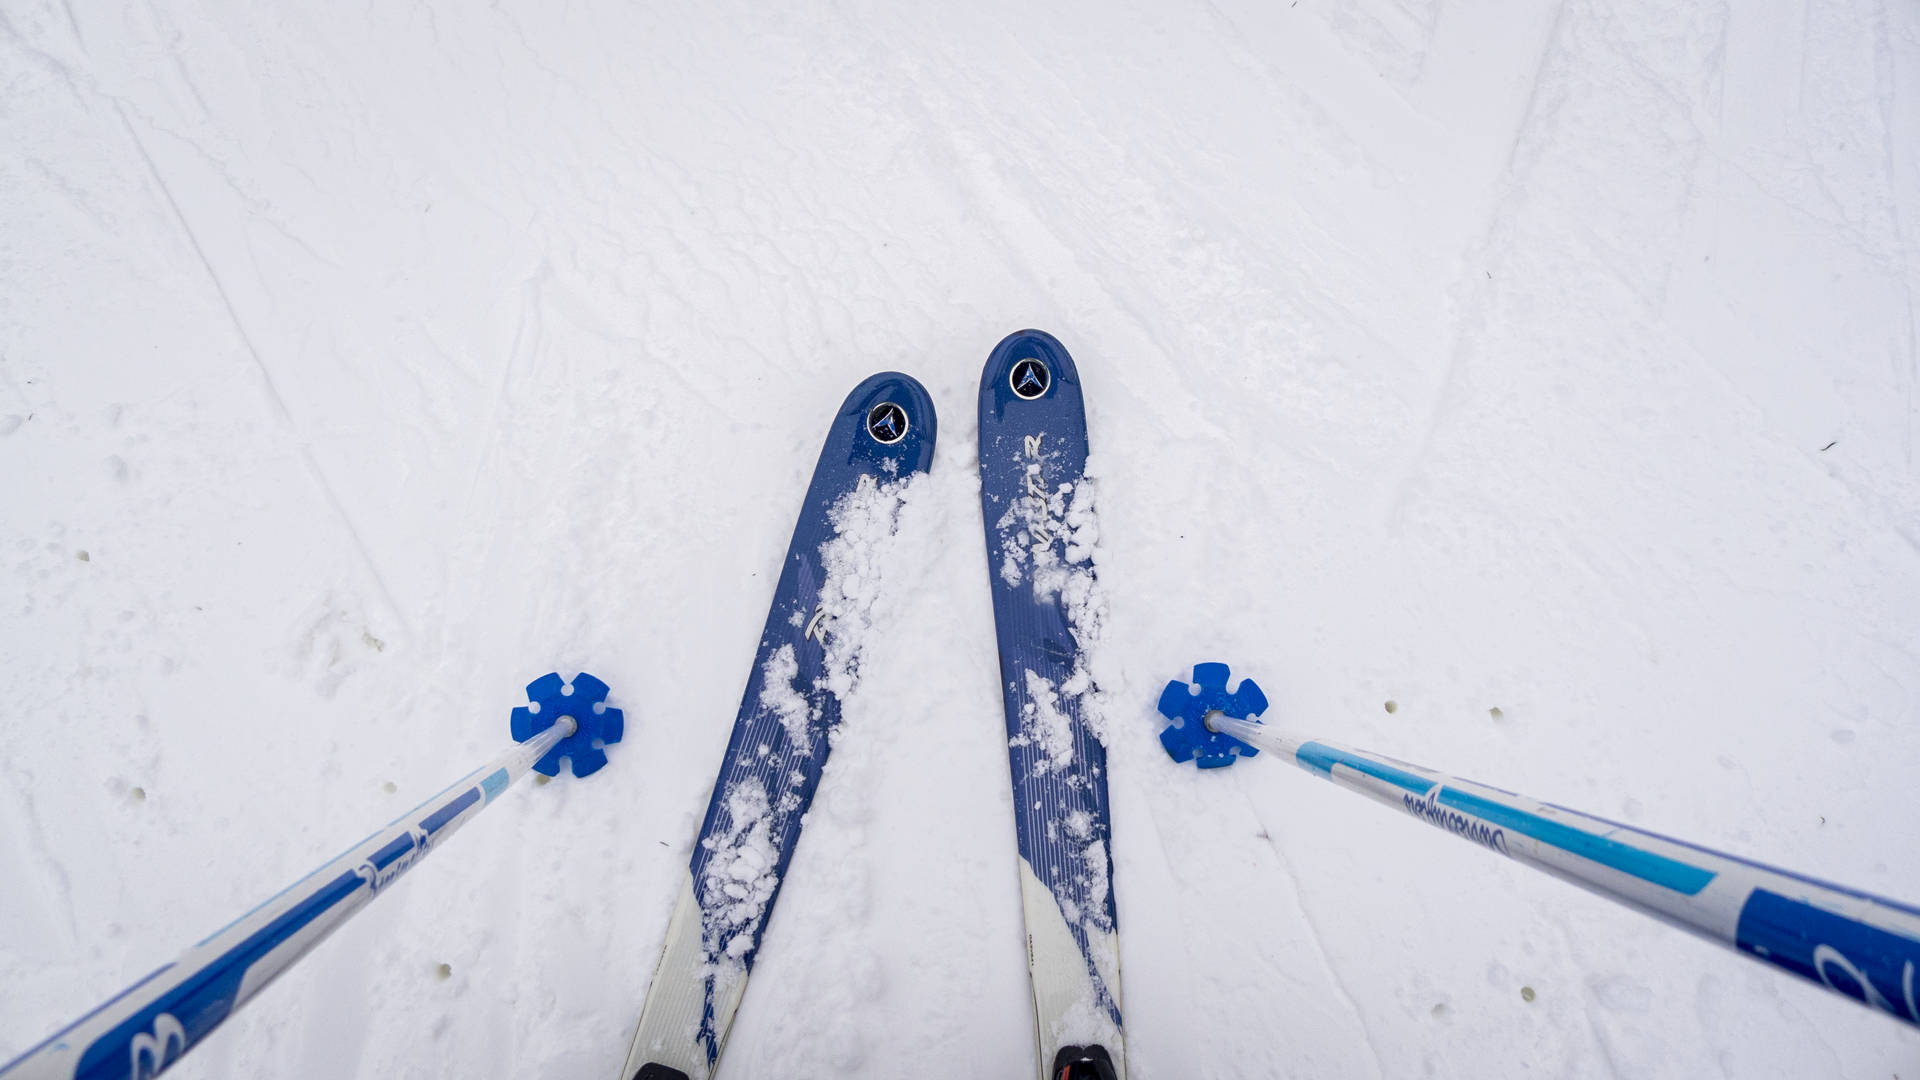 Blue Skiing Board And Poles Wallpaper